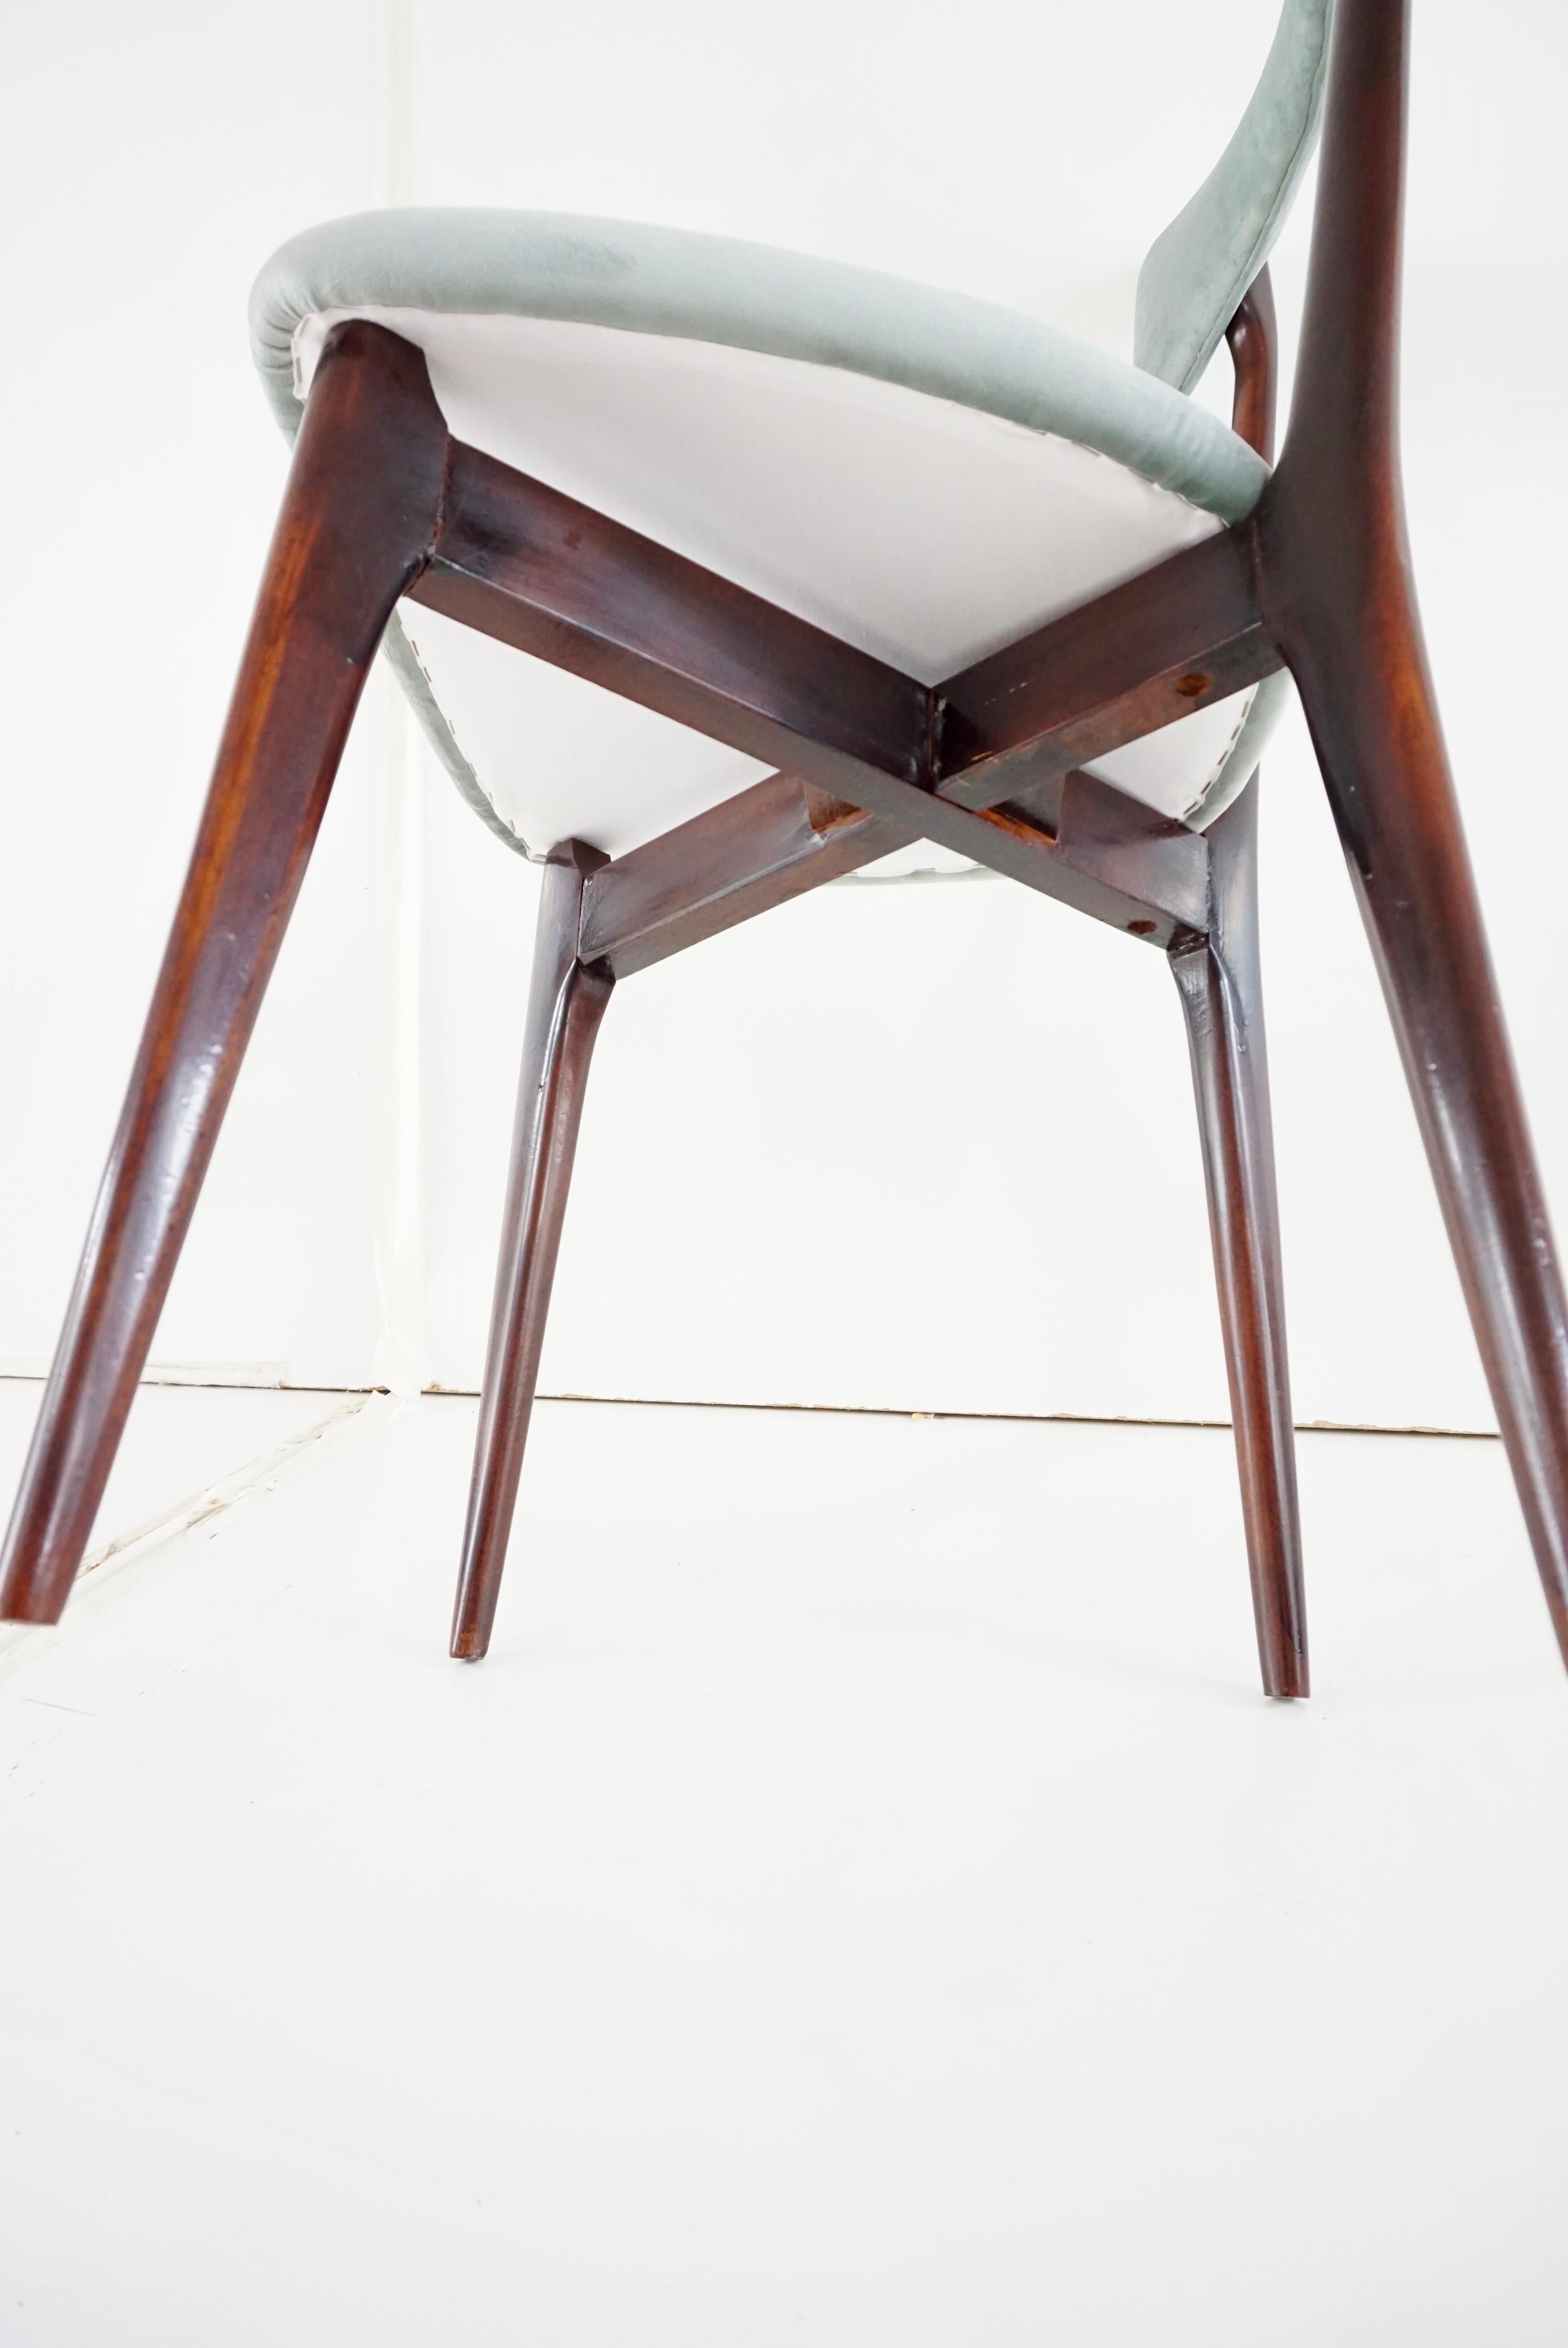 Set of Six Ico and Luisa Parisi Dining Chairs by Ariberto Colombo, 1952 For Sale 9